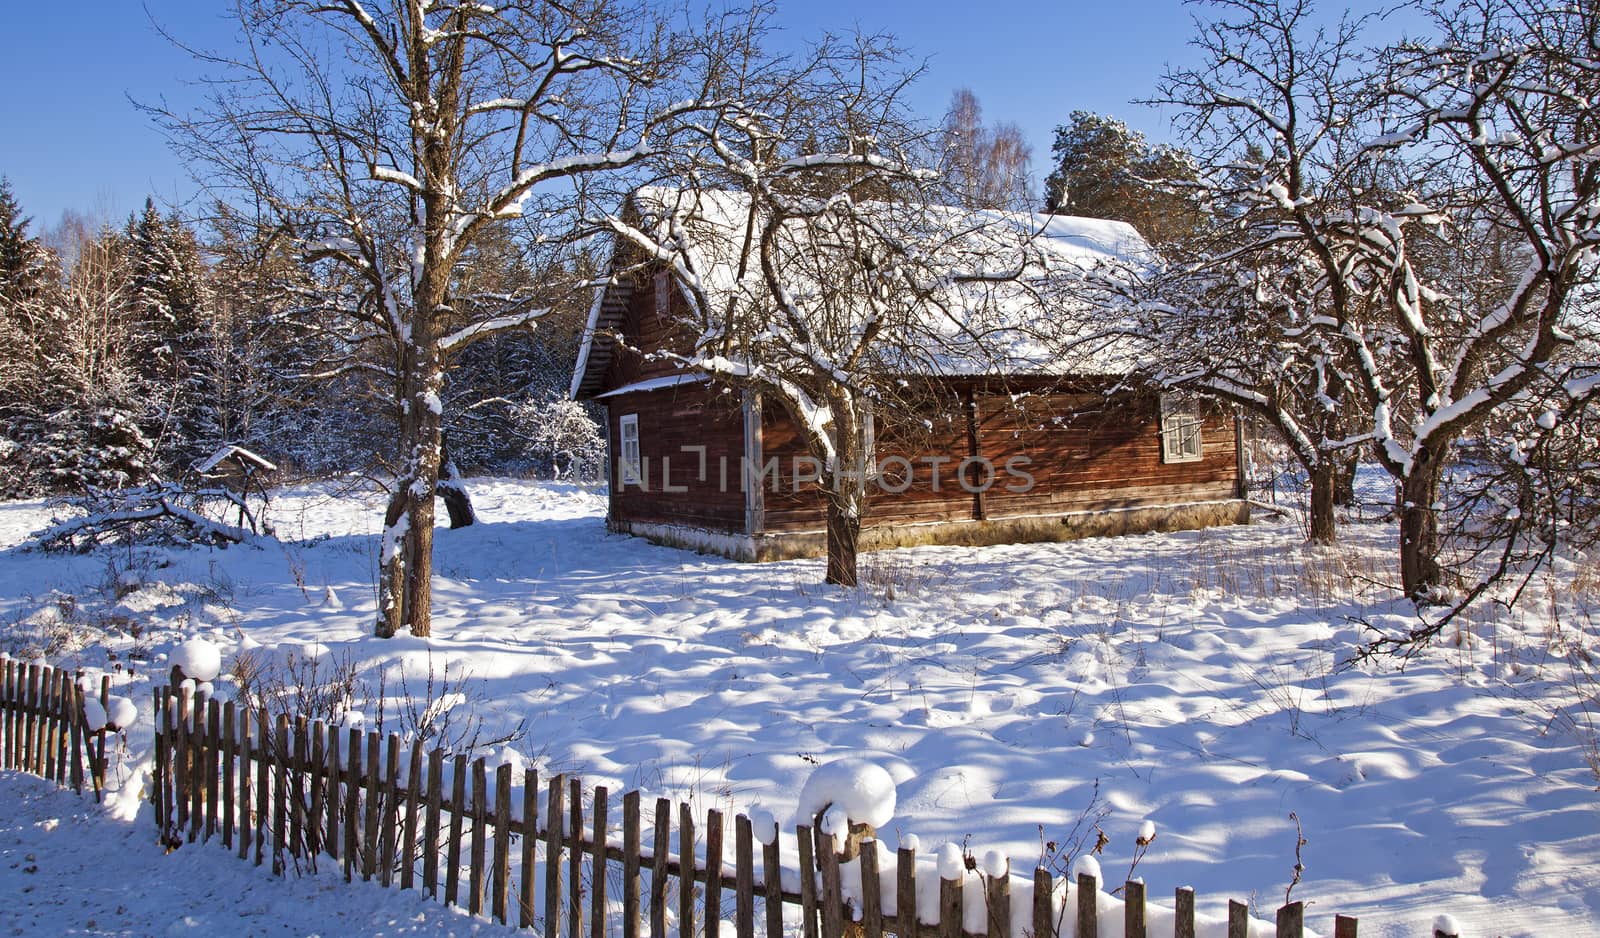   the old wooden house covered with snow in a winter season